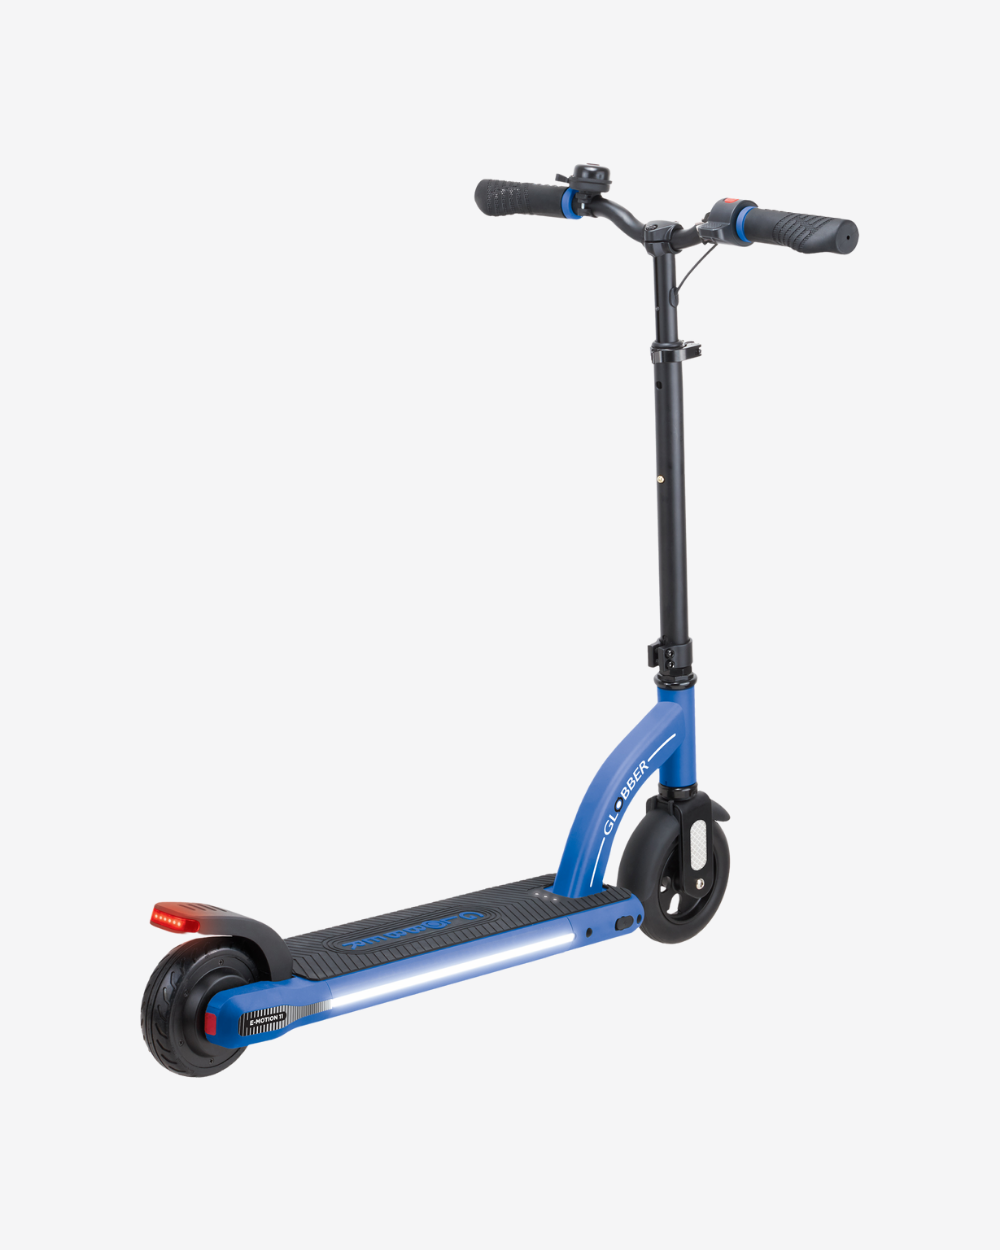 Globber E-MOTION 11 Electric Scooter | Navy Blue